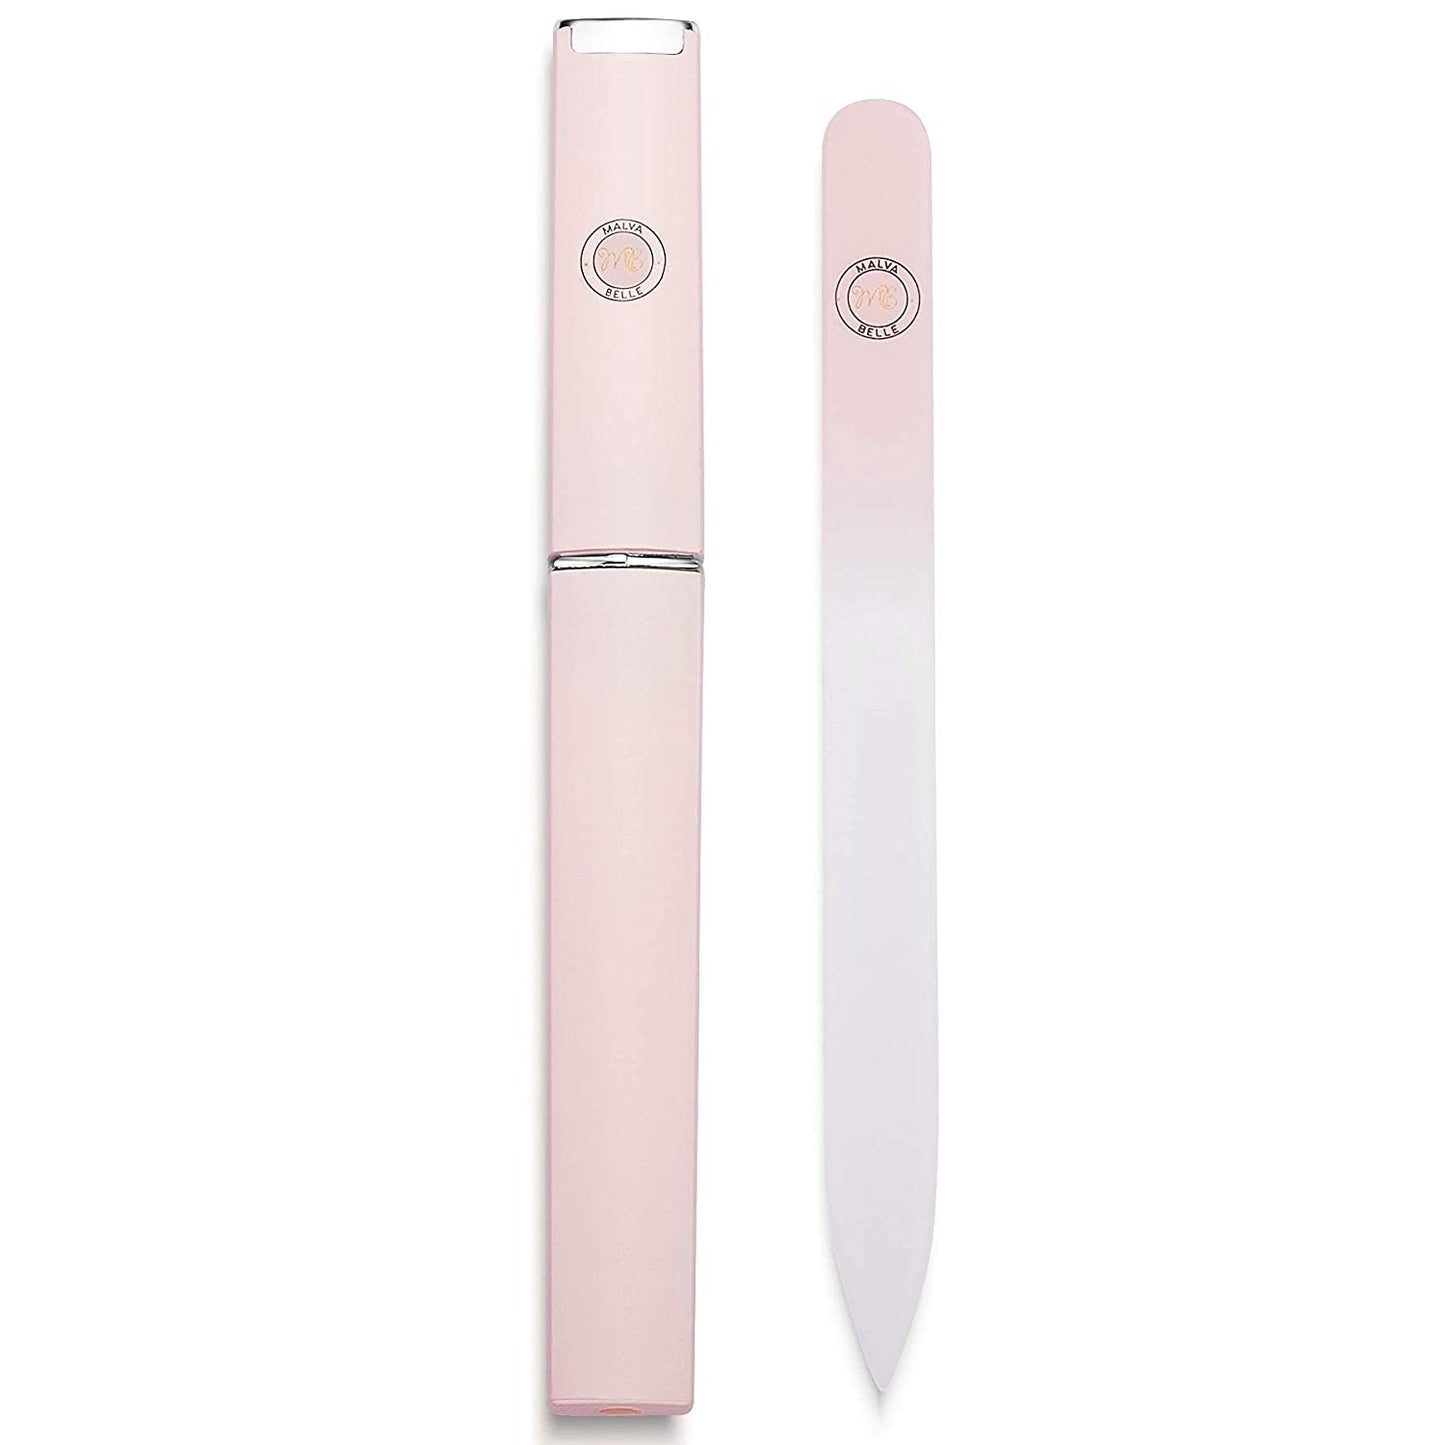 Crystal Glass Nail File with Protective Case - Pink, 2mm